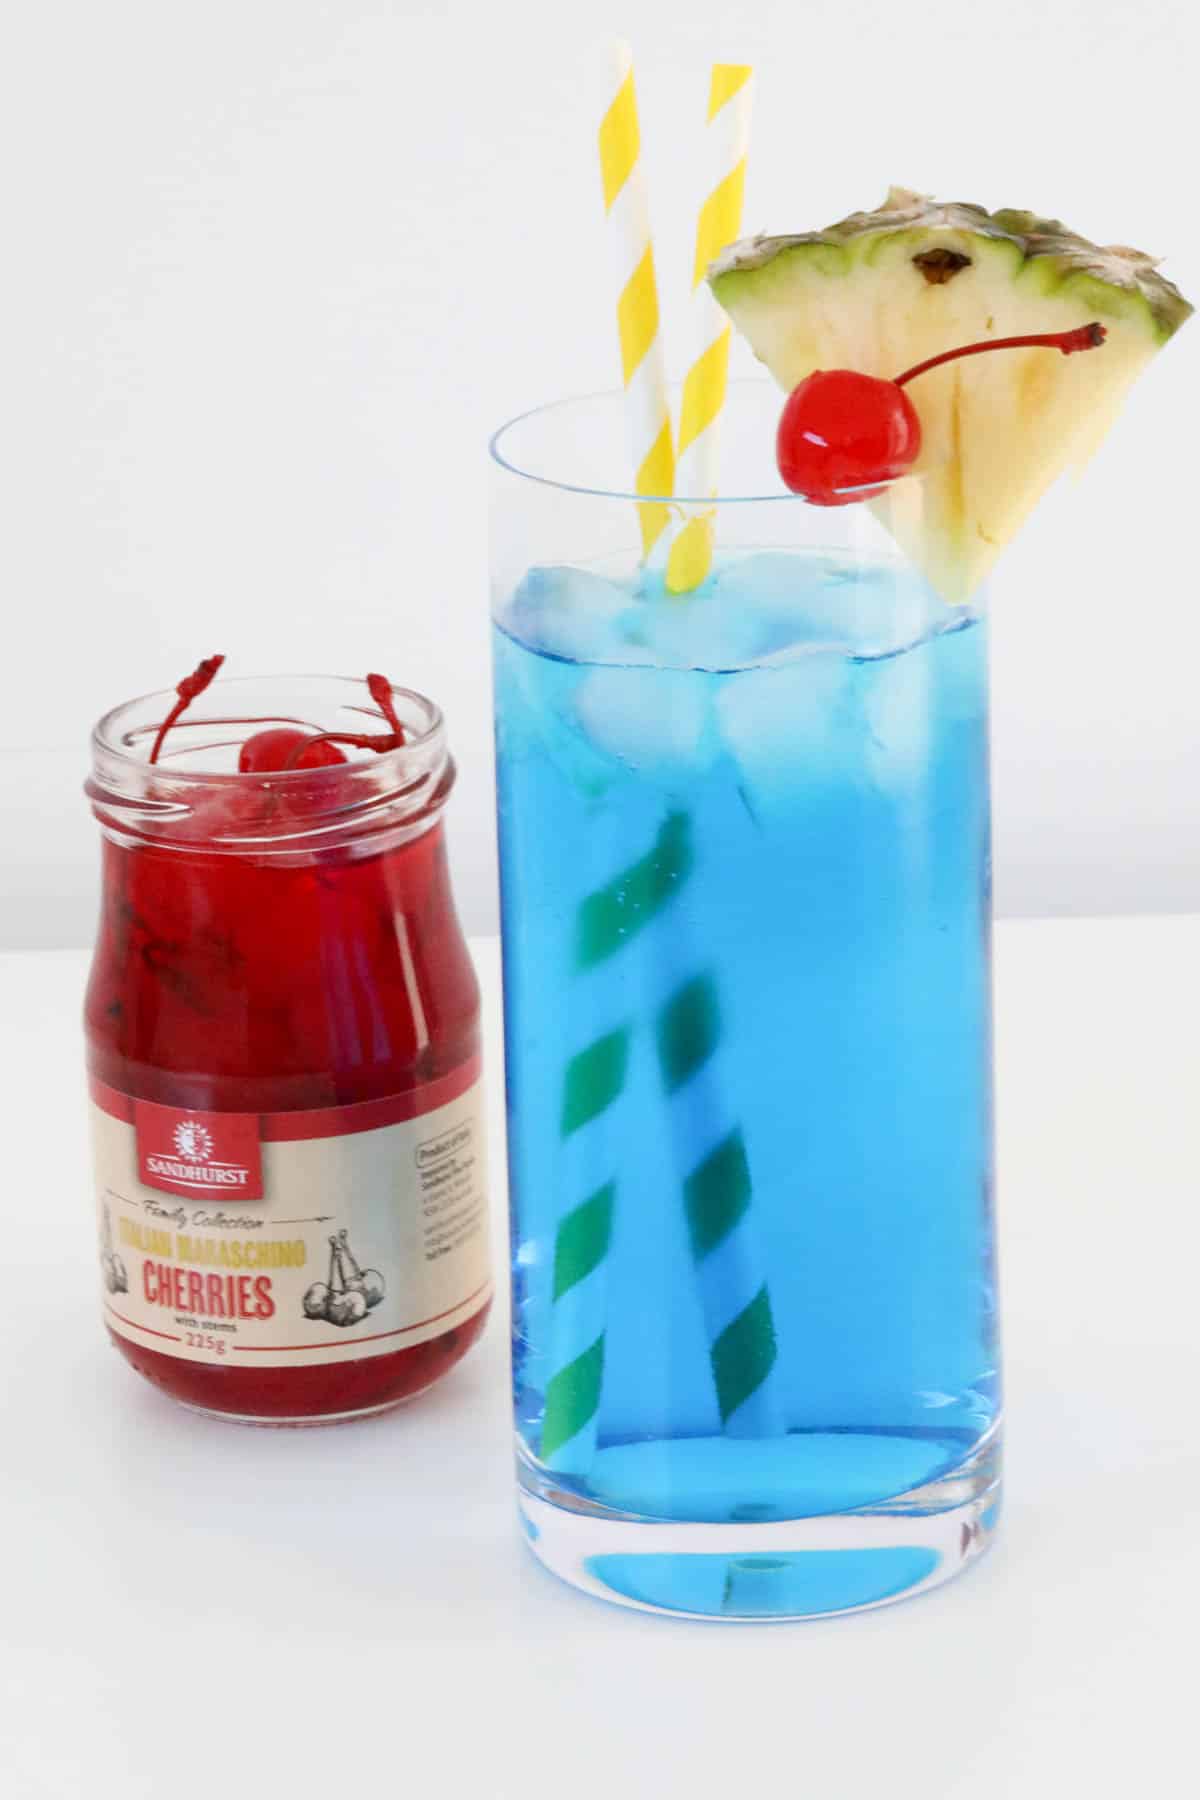 Vodka, blue curacao and lemonade in a tropically decorated glass.